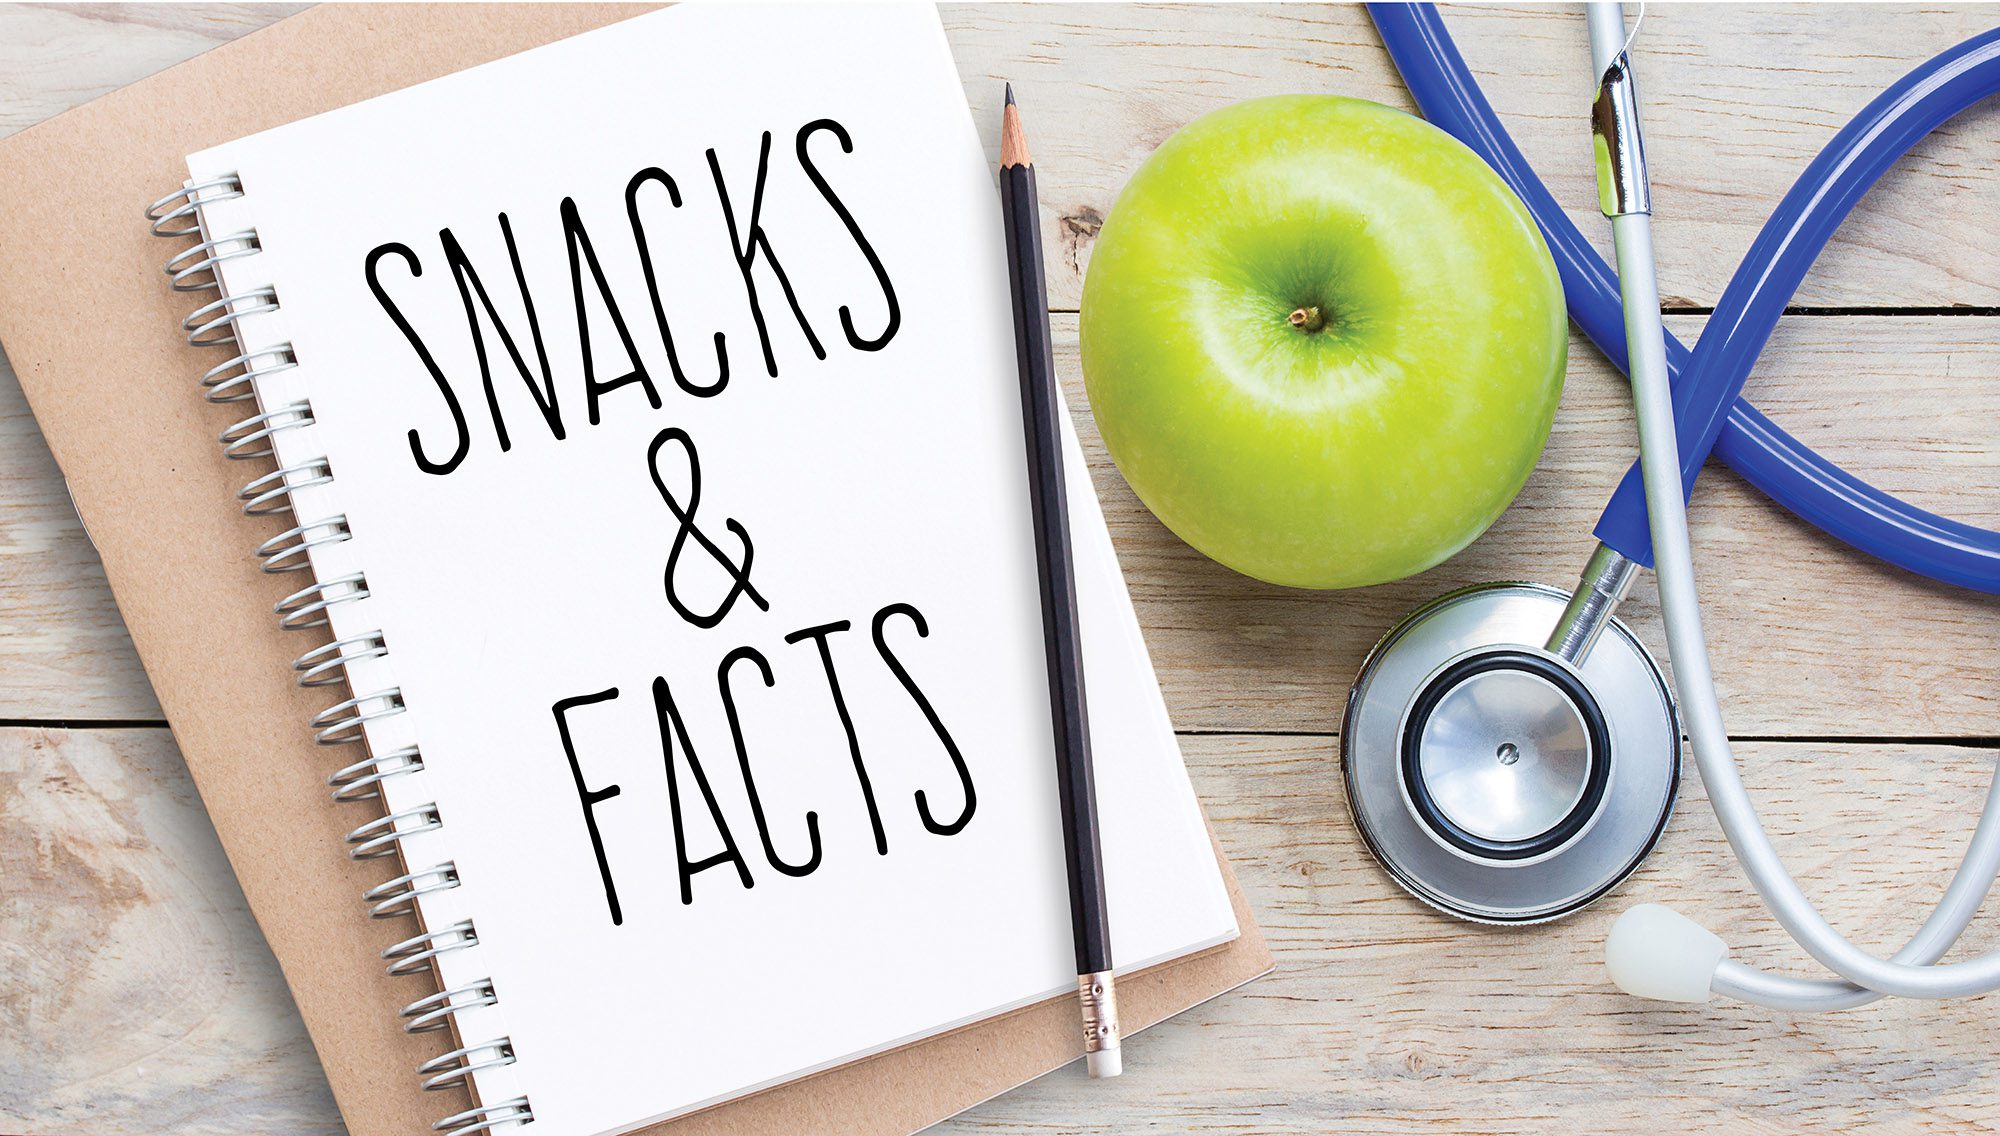 Snacks and facts image